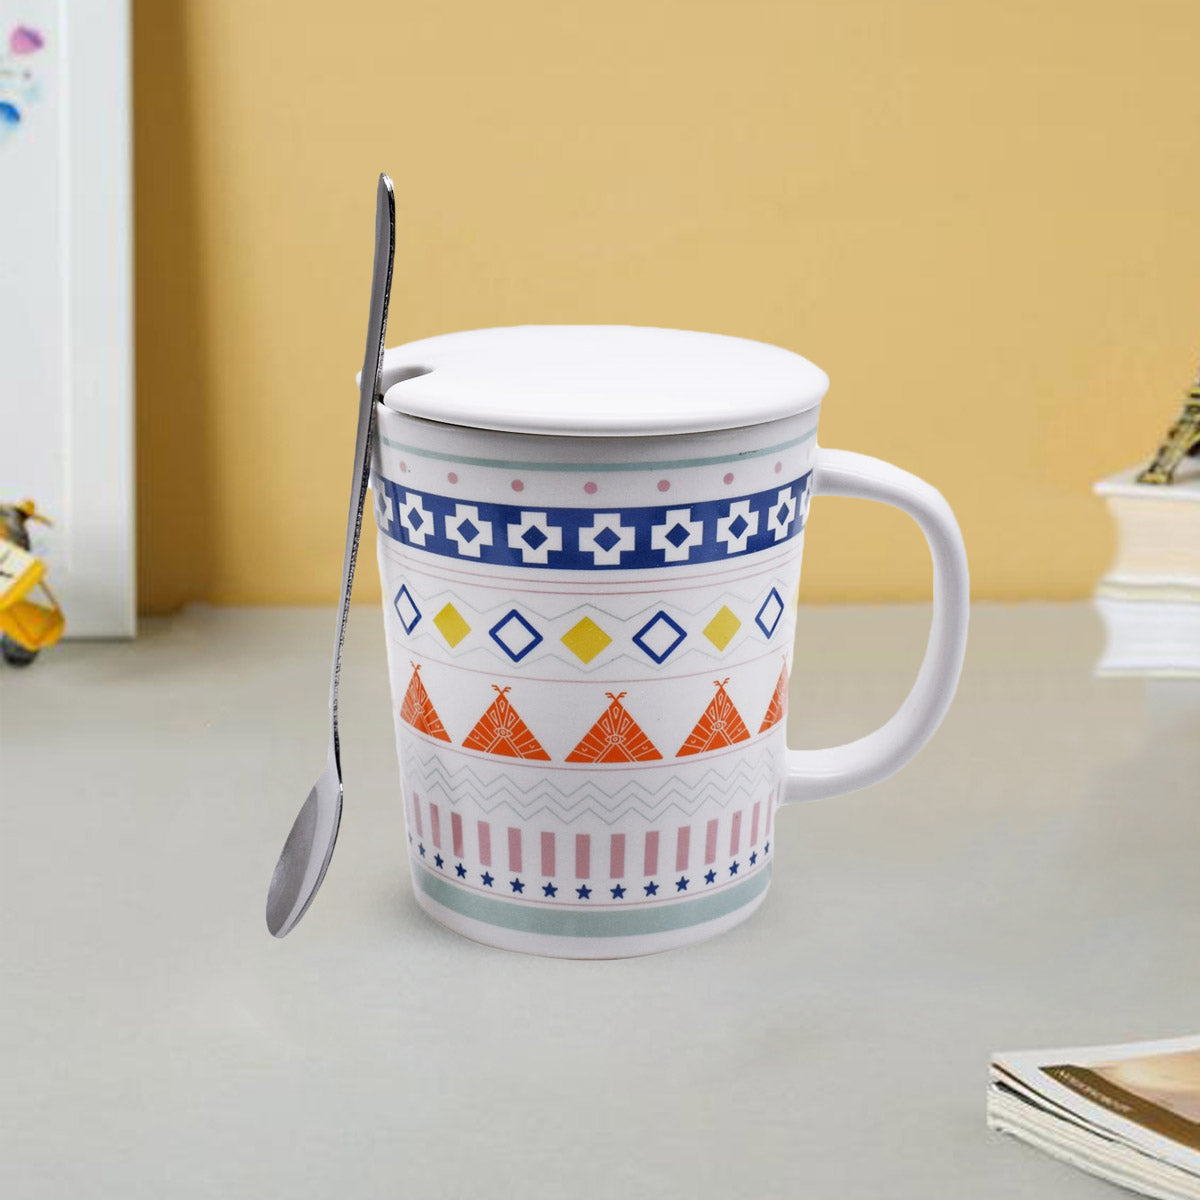 Fancy Ceramic Coffee or Tea Mug with Lid and Handle with Spoon (8538)